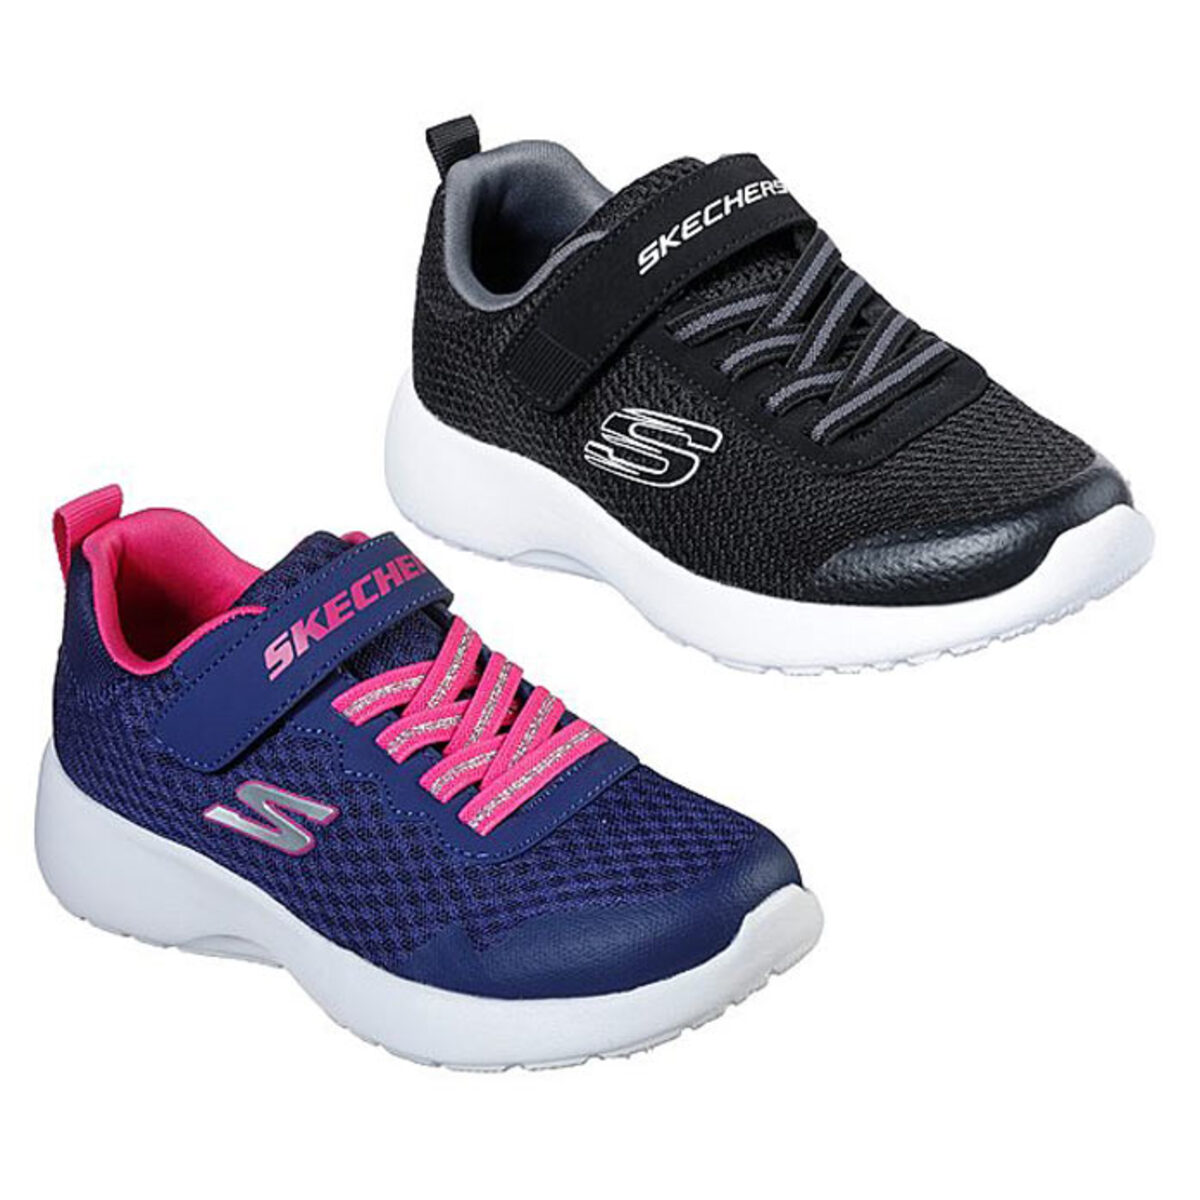 skechers slip on with laces